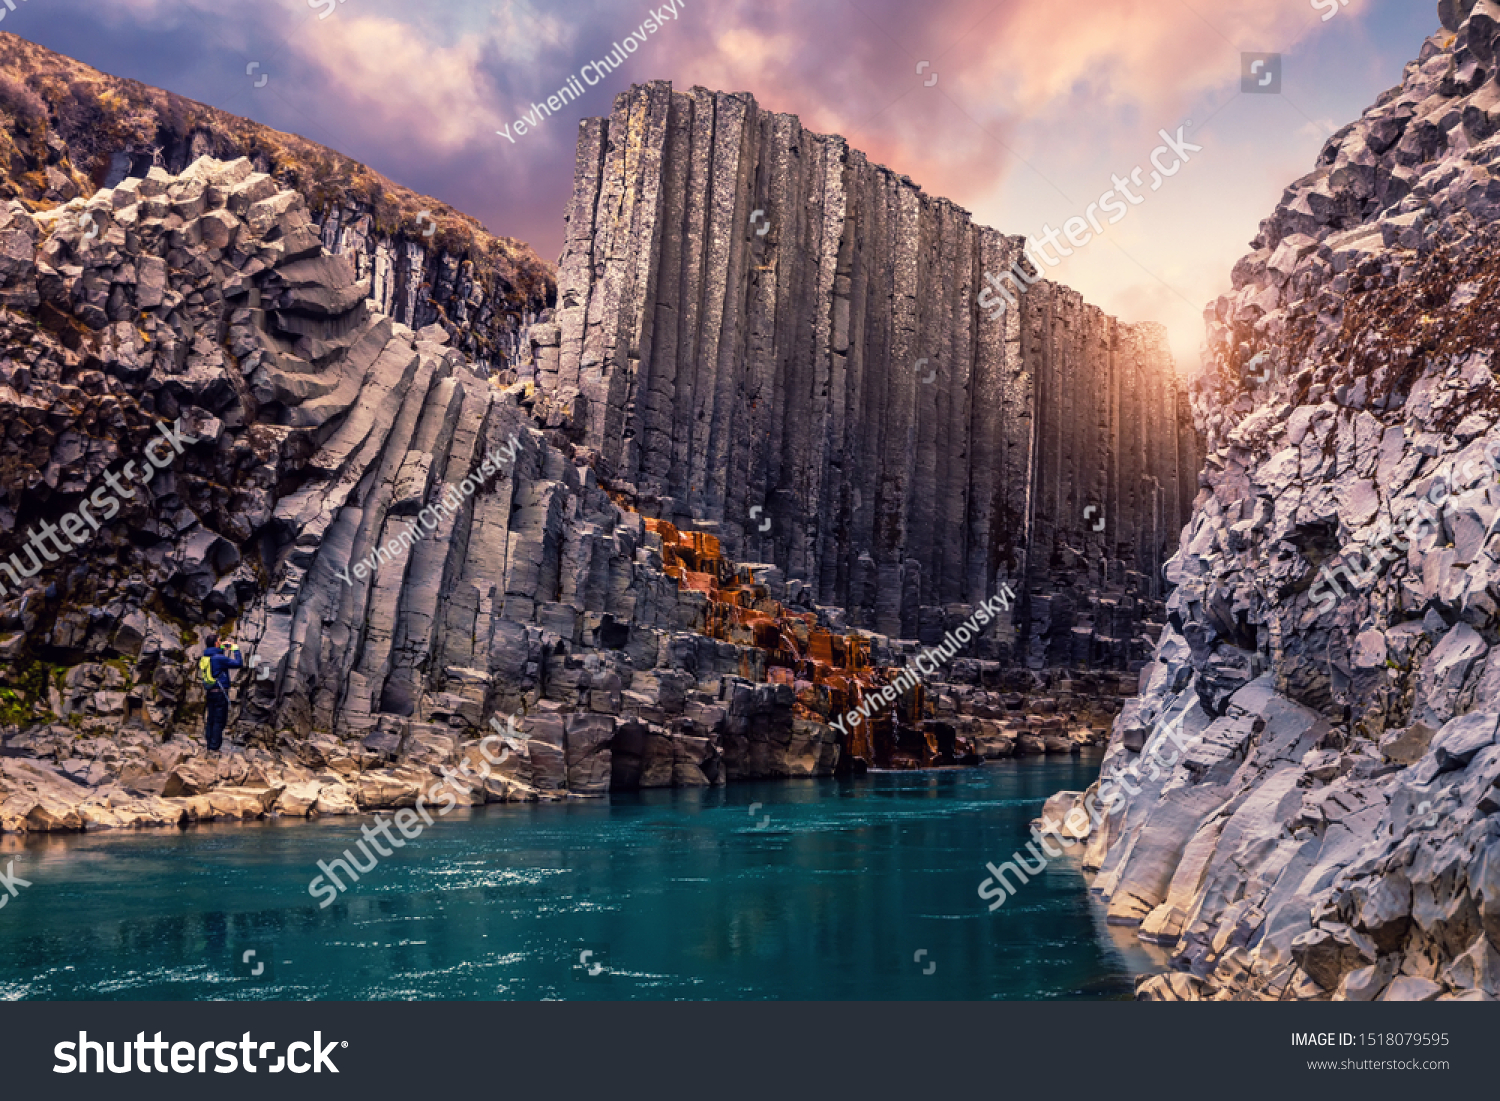 Amazing Nature landscape of Iceland. Impressively beautiful Studlagil canyon with basalt columns and colorful sky during sunset. Tipical Iceland scenery. Iconic location for photographers and bloggers #1518079595